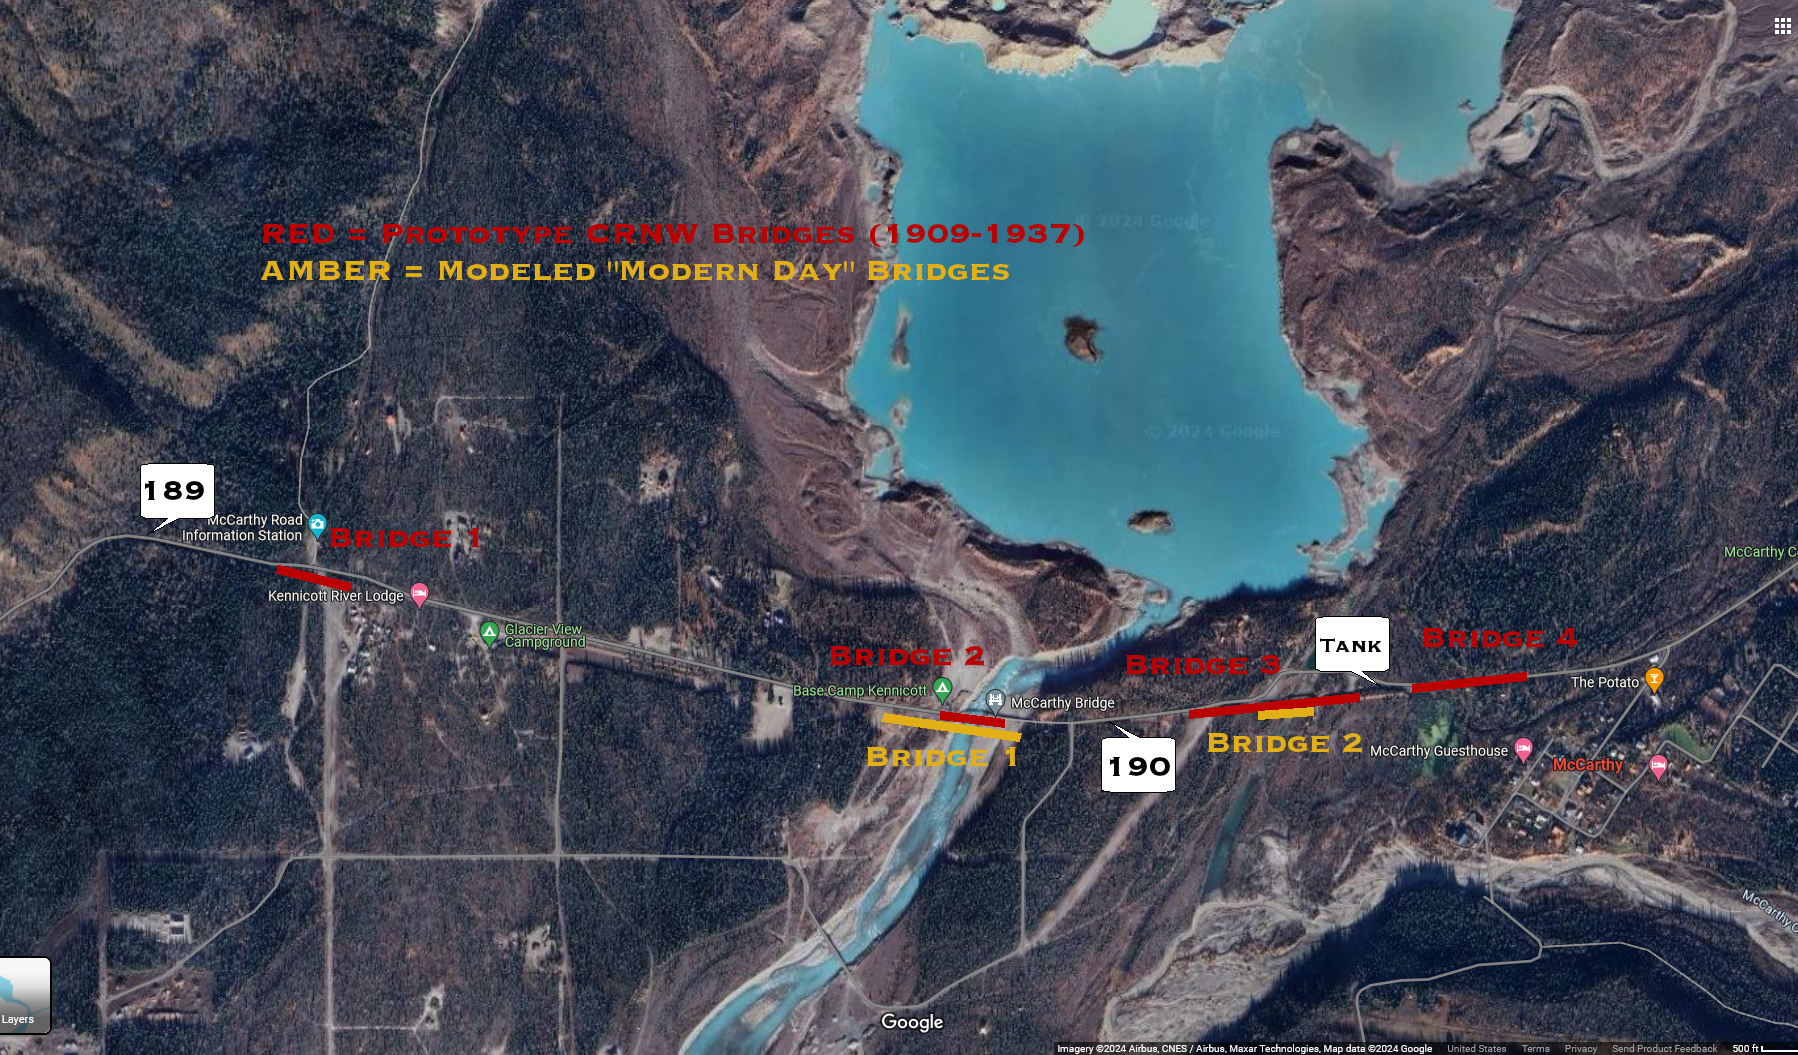 Location of prototype and model bridges over the Kennicott River